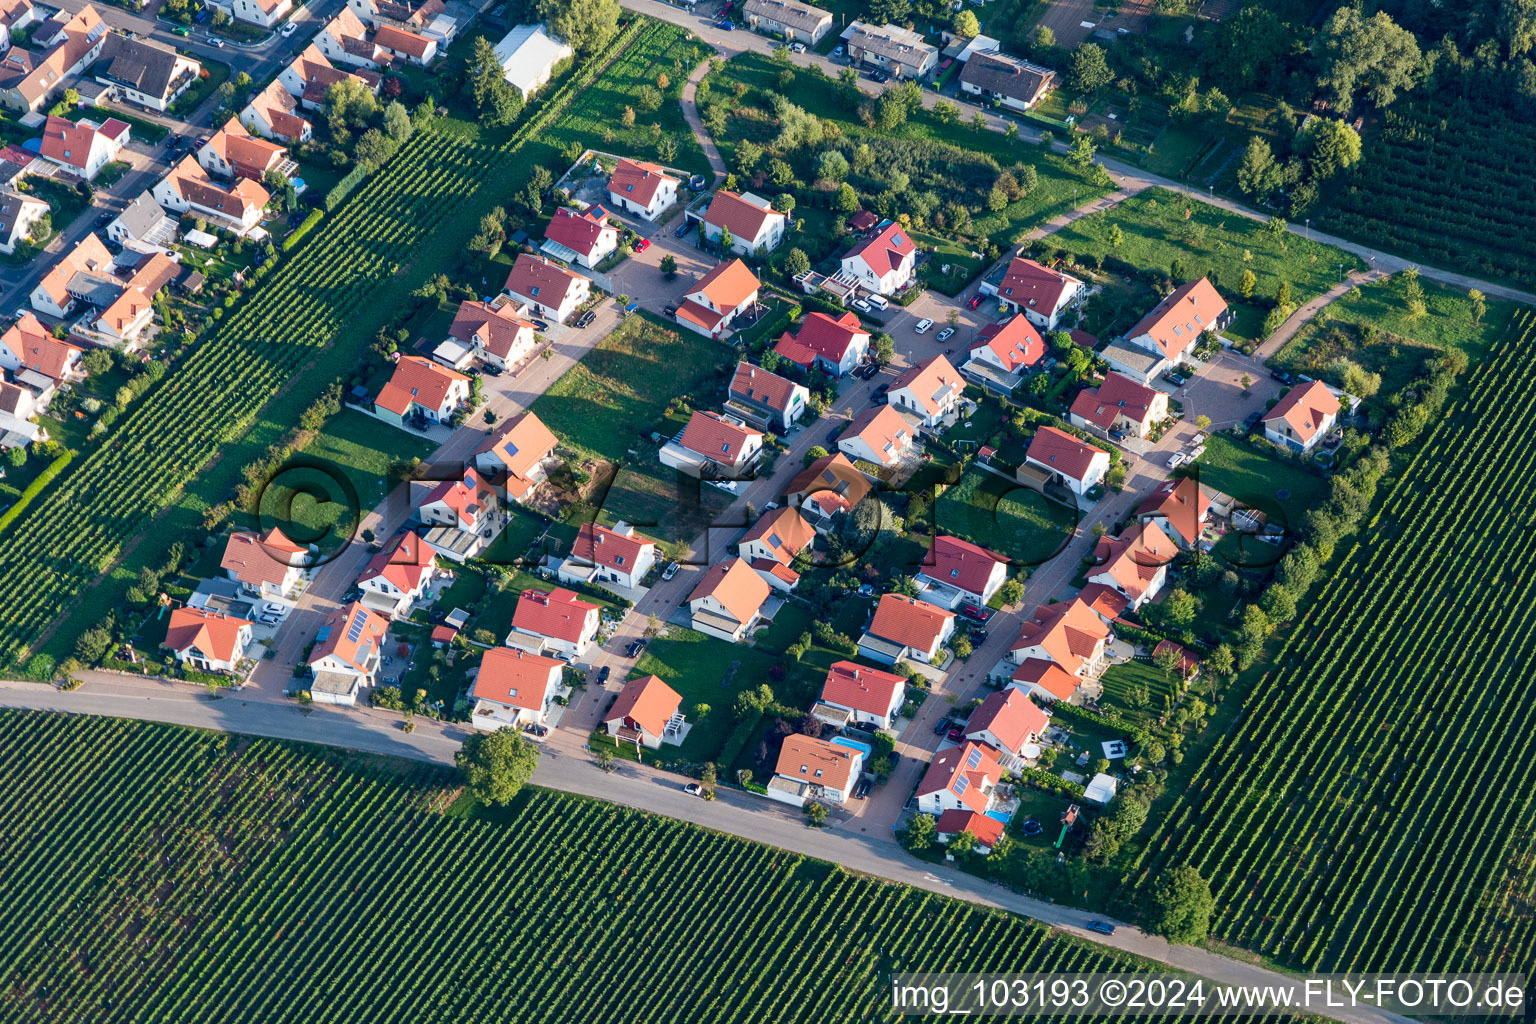 Settlement area in the district Nussdorf in Landau in der Pfalz in the state Rhineland-Palatinate, Germany